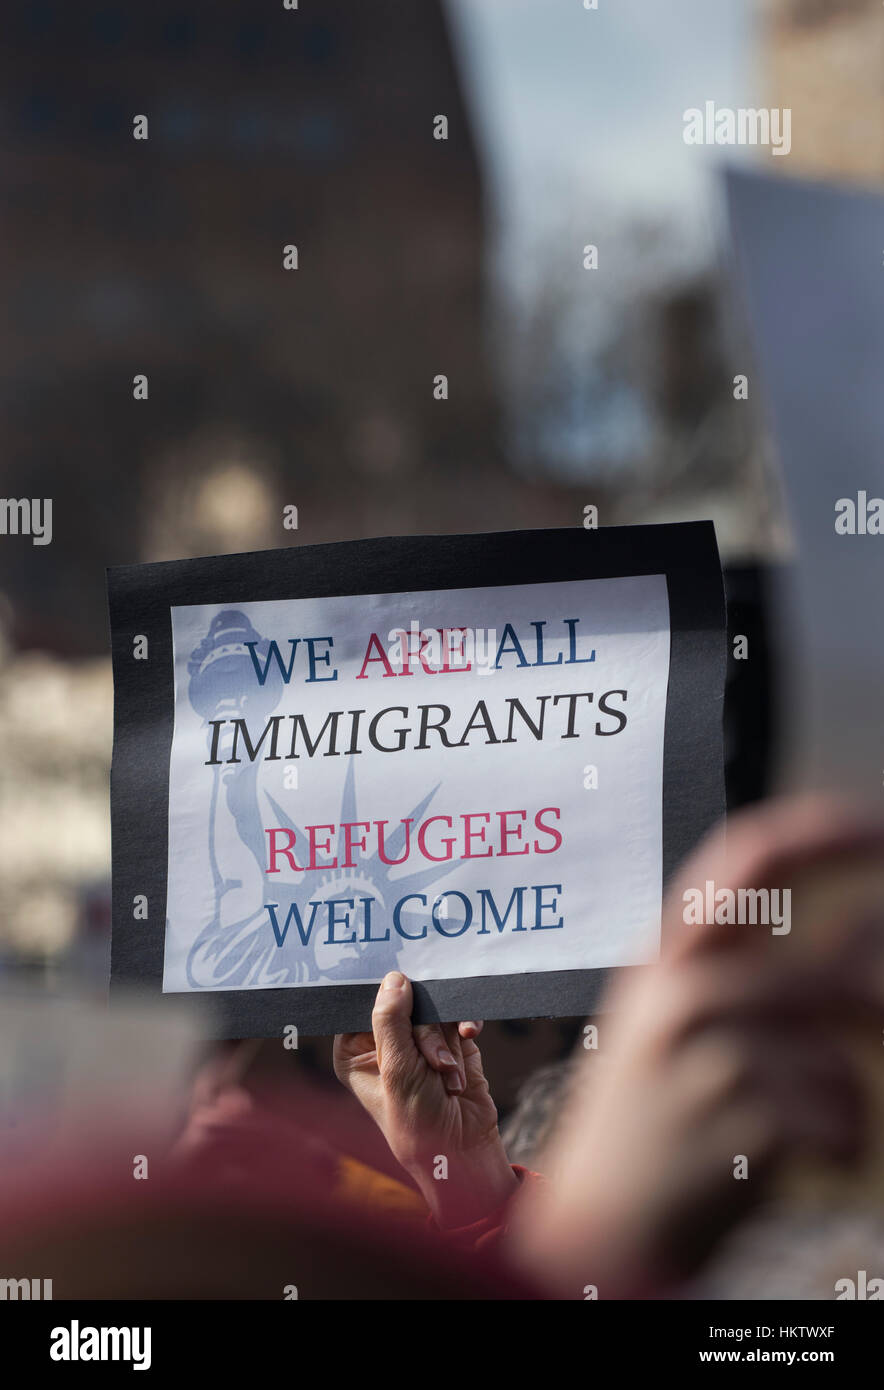 Boston, Massachusetts, USA. 29th January, 2017.  More than 20,000 demonstrators filled Copley Square in central Boston protesting President Donald Trump’s executive order stopped immigration from Iran, Iraq, Yemen, Somalia, Sudan, Libya and Syria to the United States.  Photo shows a hand holding a small protest sign supporting Immigrants.   The demonstration in Copley Square was organized by the Massachusetts branch of the Council on American-Islamic Relations, CAIR.  Credit: Chuck Nacke/Alamy Live News Stock Photo